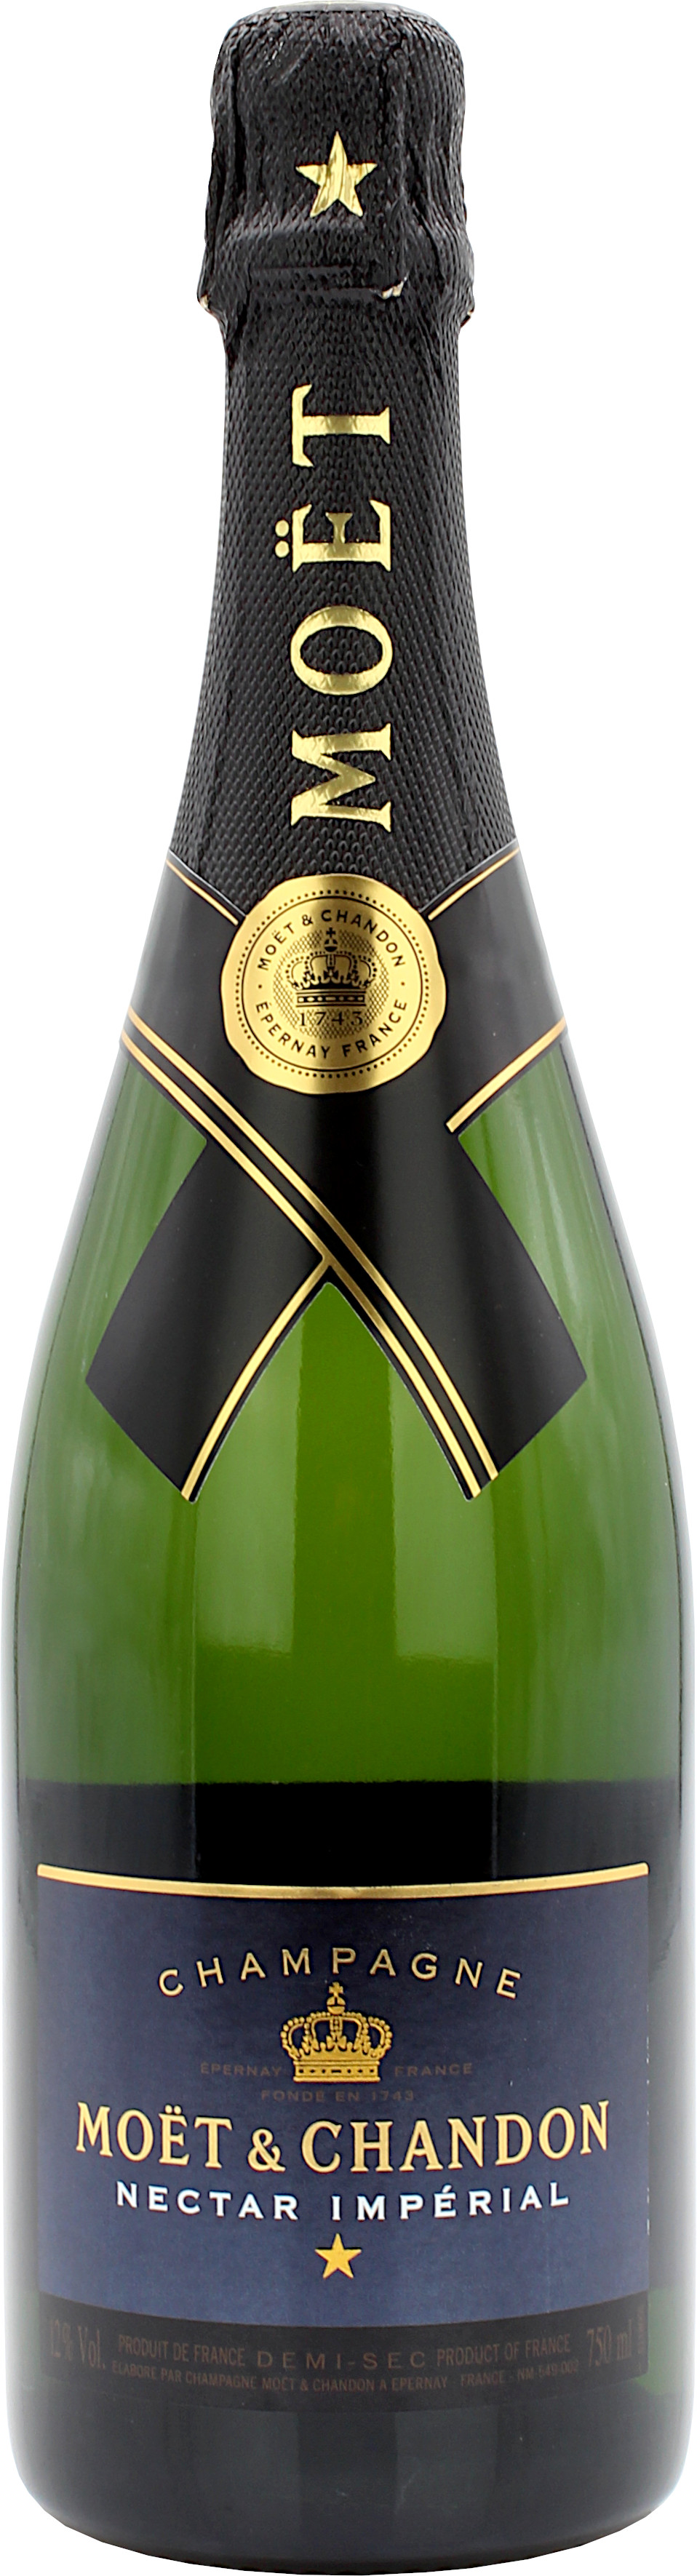 Moet & Chandon Nectar Imperial 12.0% 0,75l